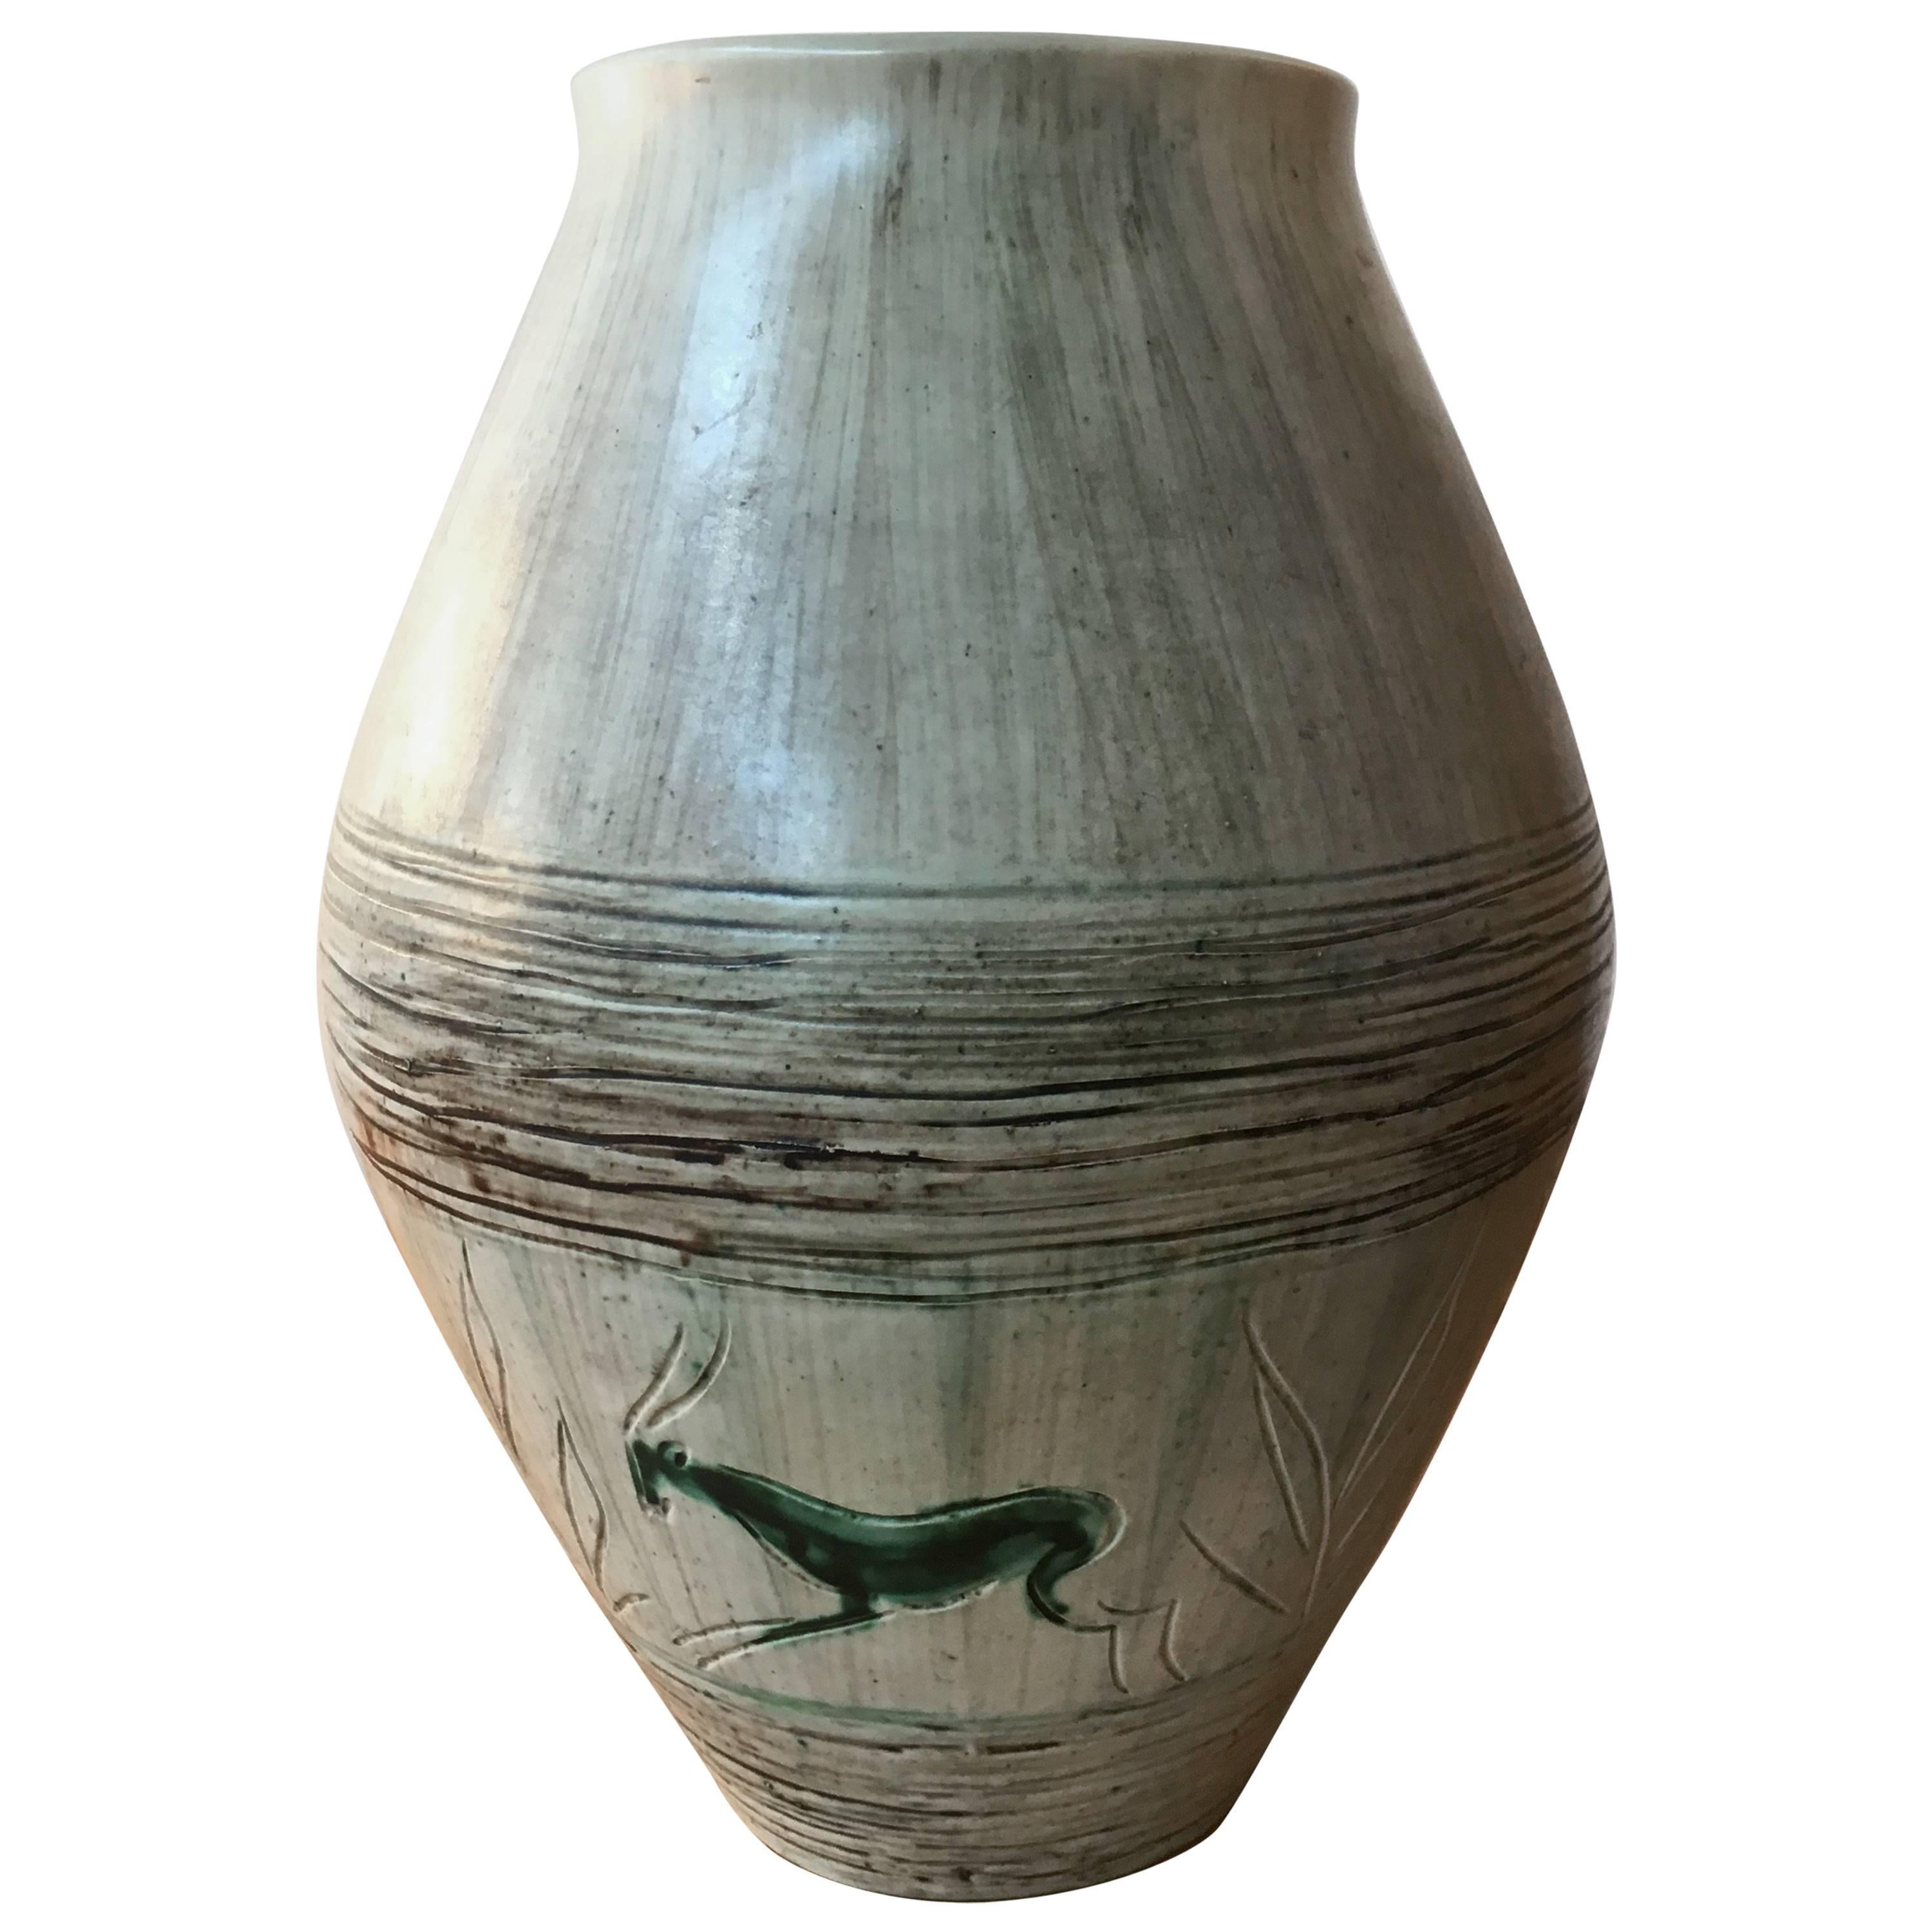 Vallauris Vase Signed by Yoal